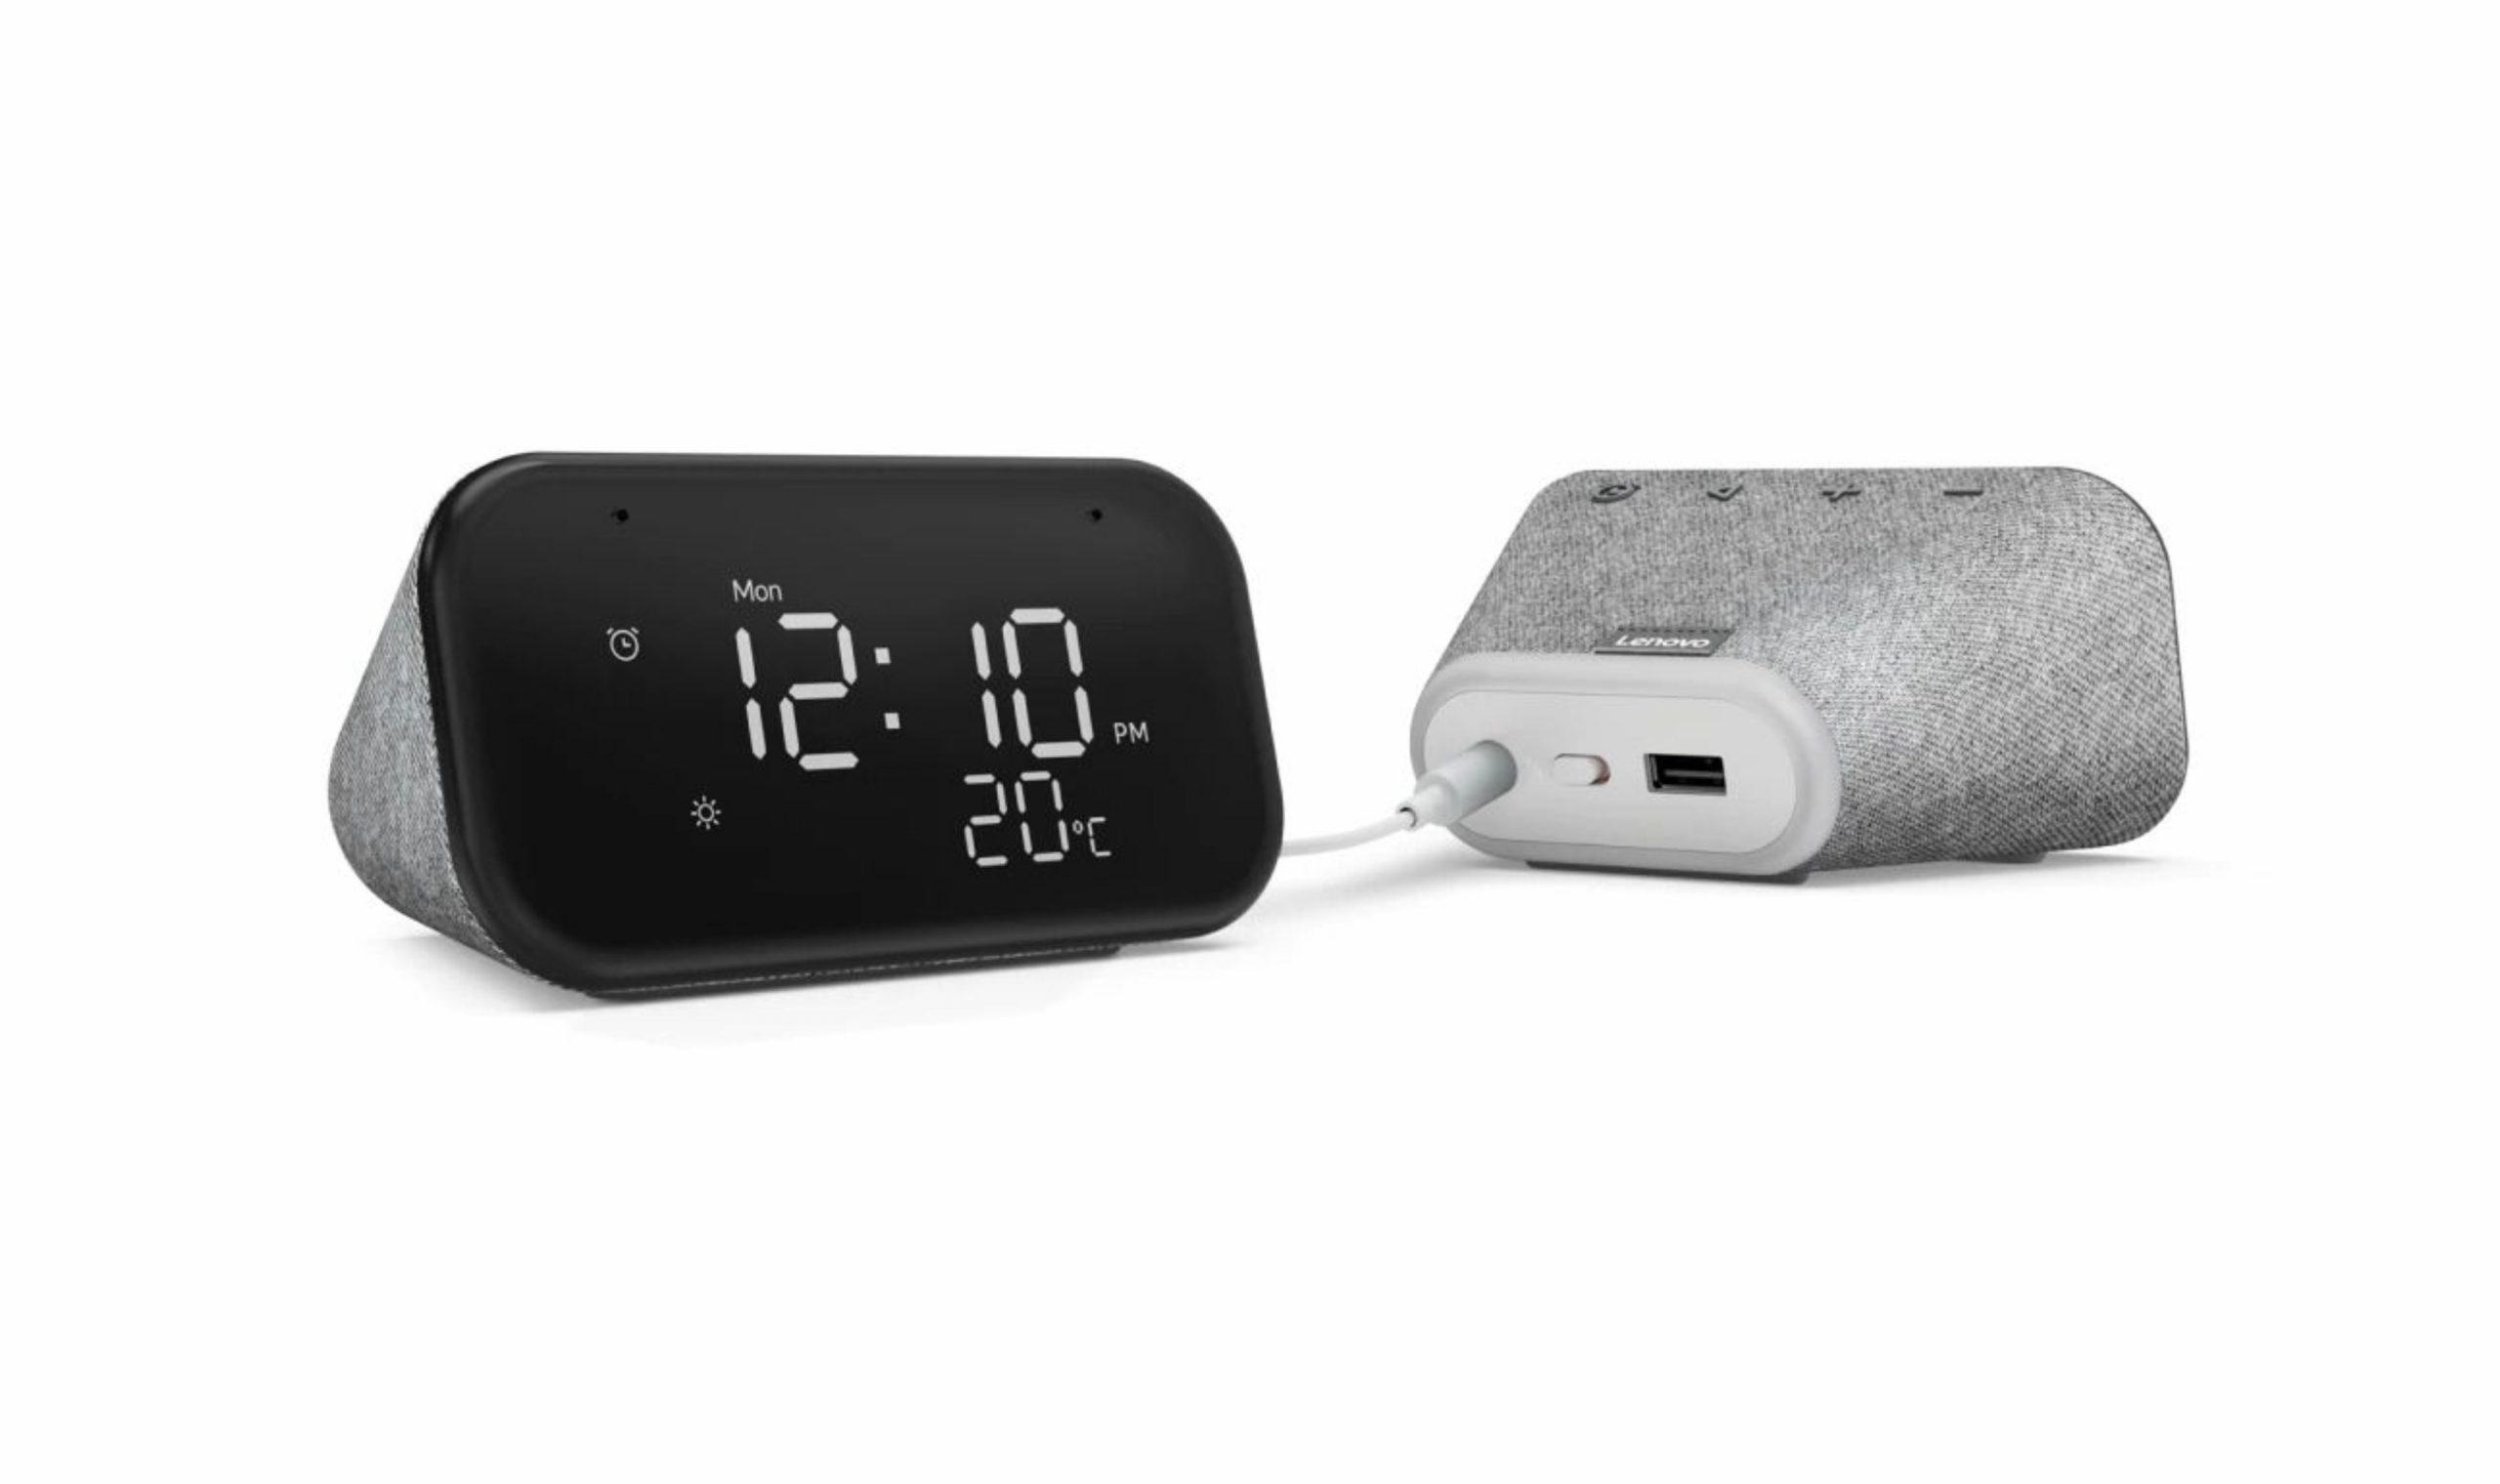 Lenovo Smart Clock Essential is now on sale in the US for $49.99